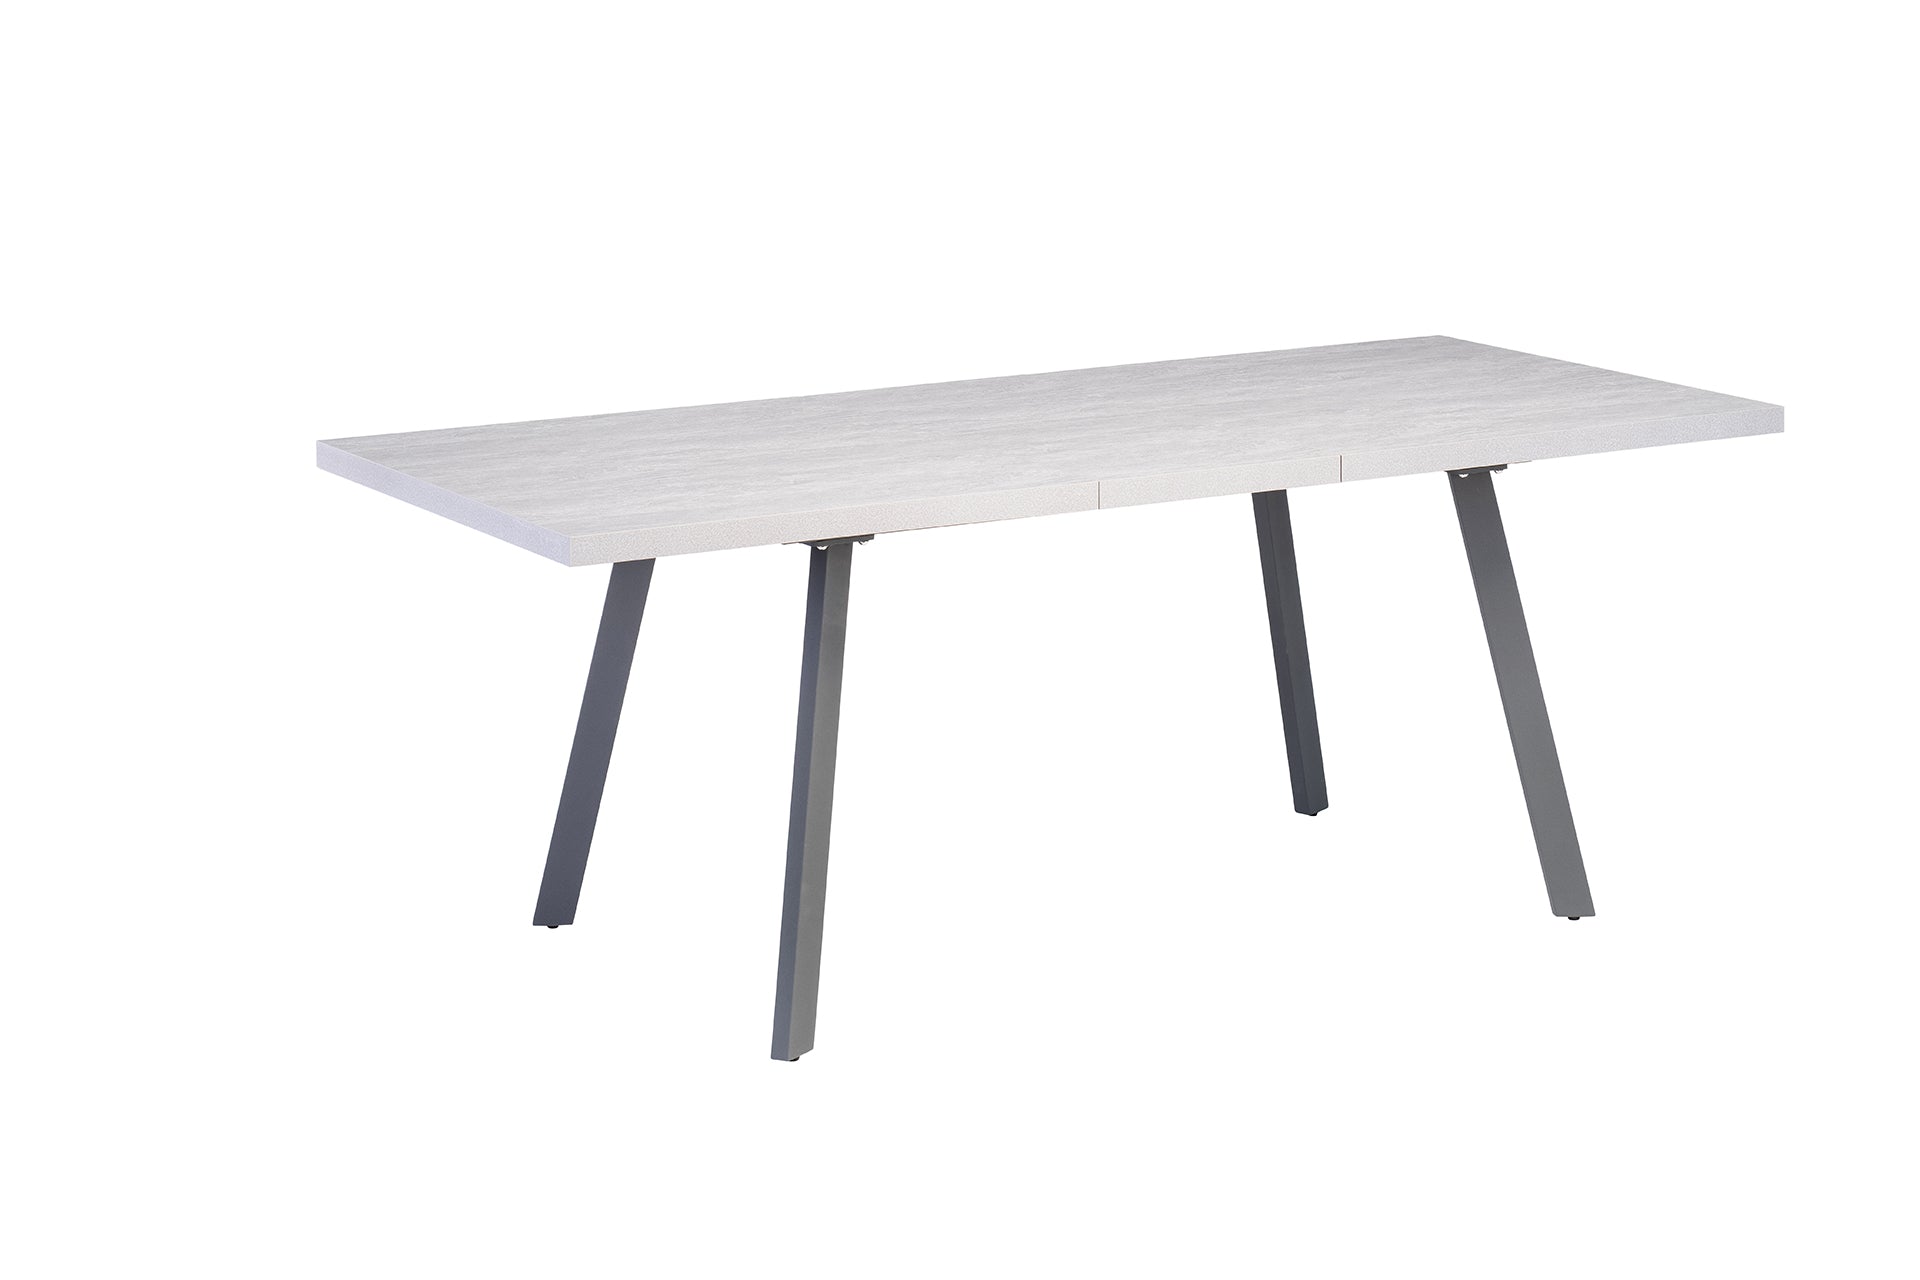 Ceramic Look Ext Dining Table